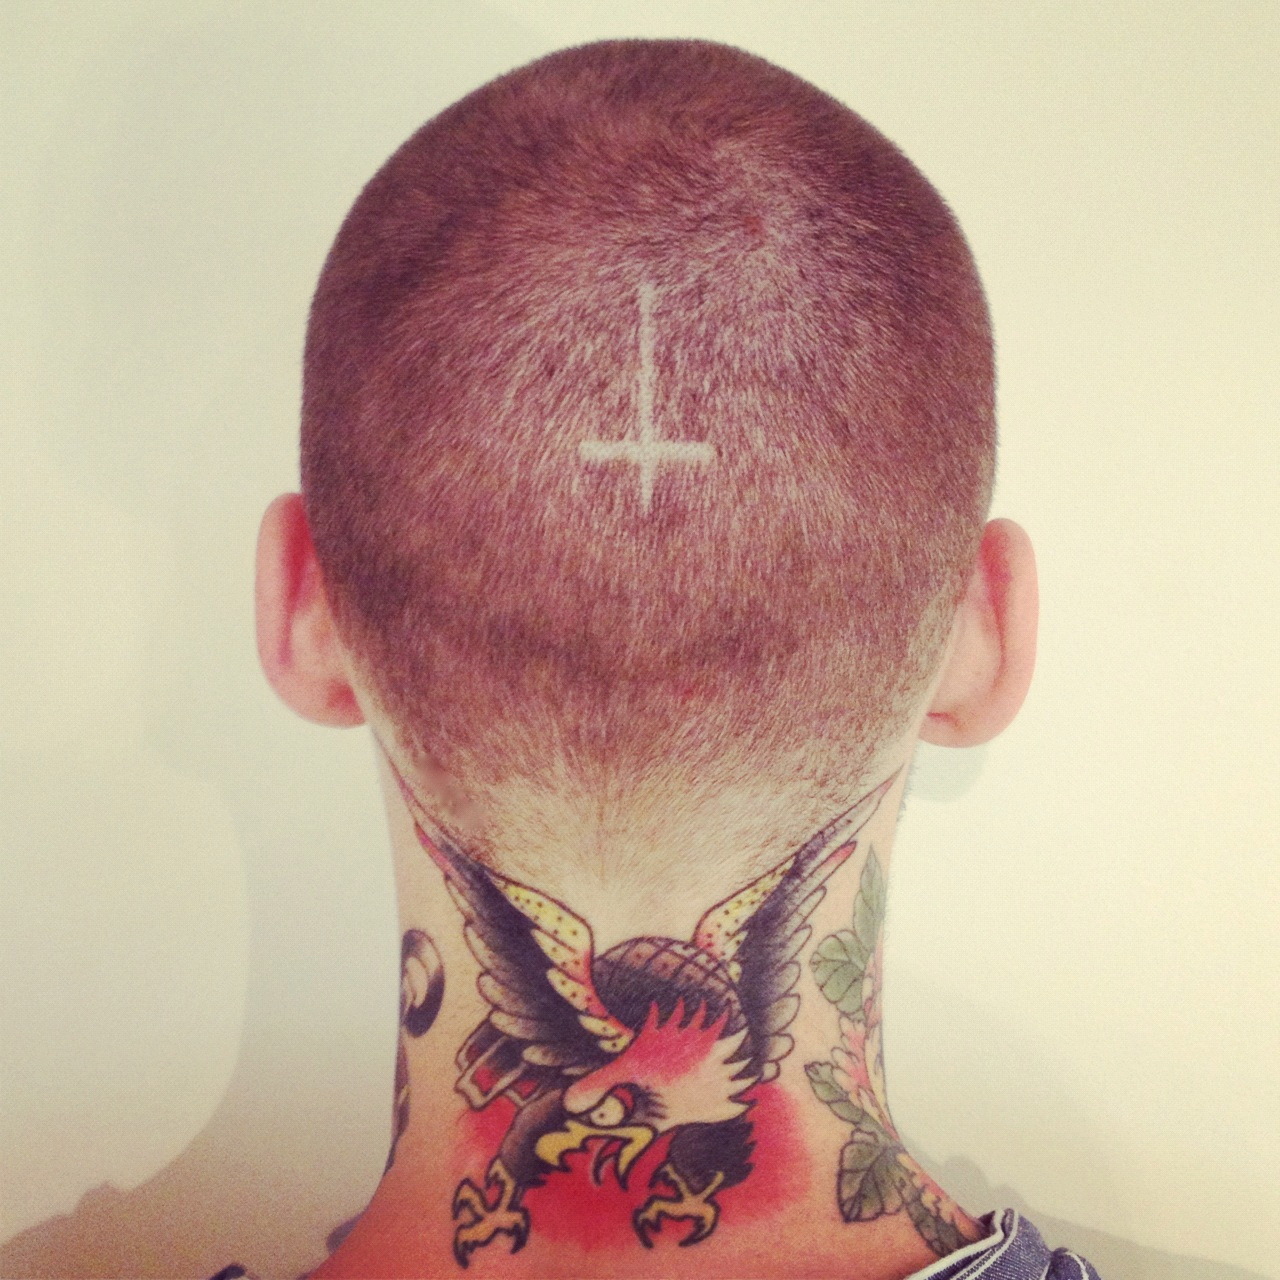 mikeypearson: Scissor over comb and upside down cross today at work.